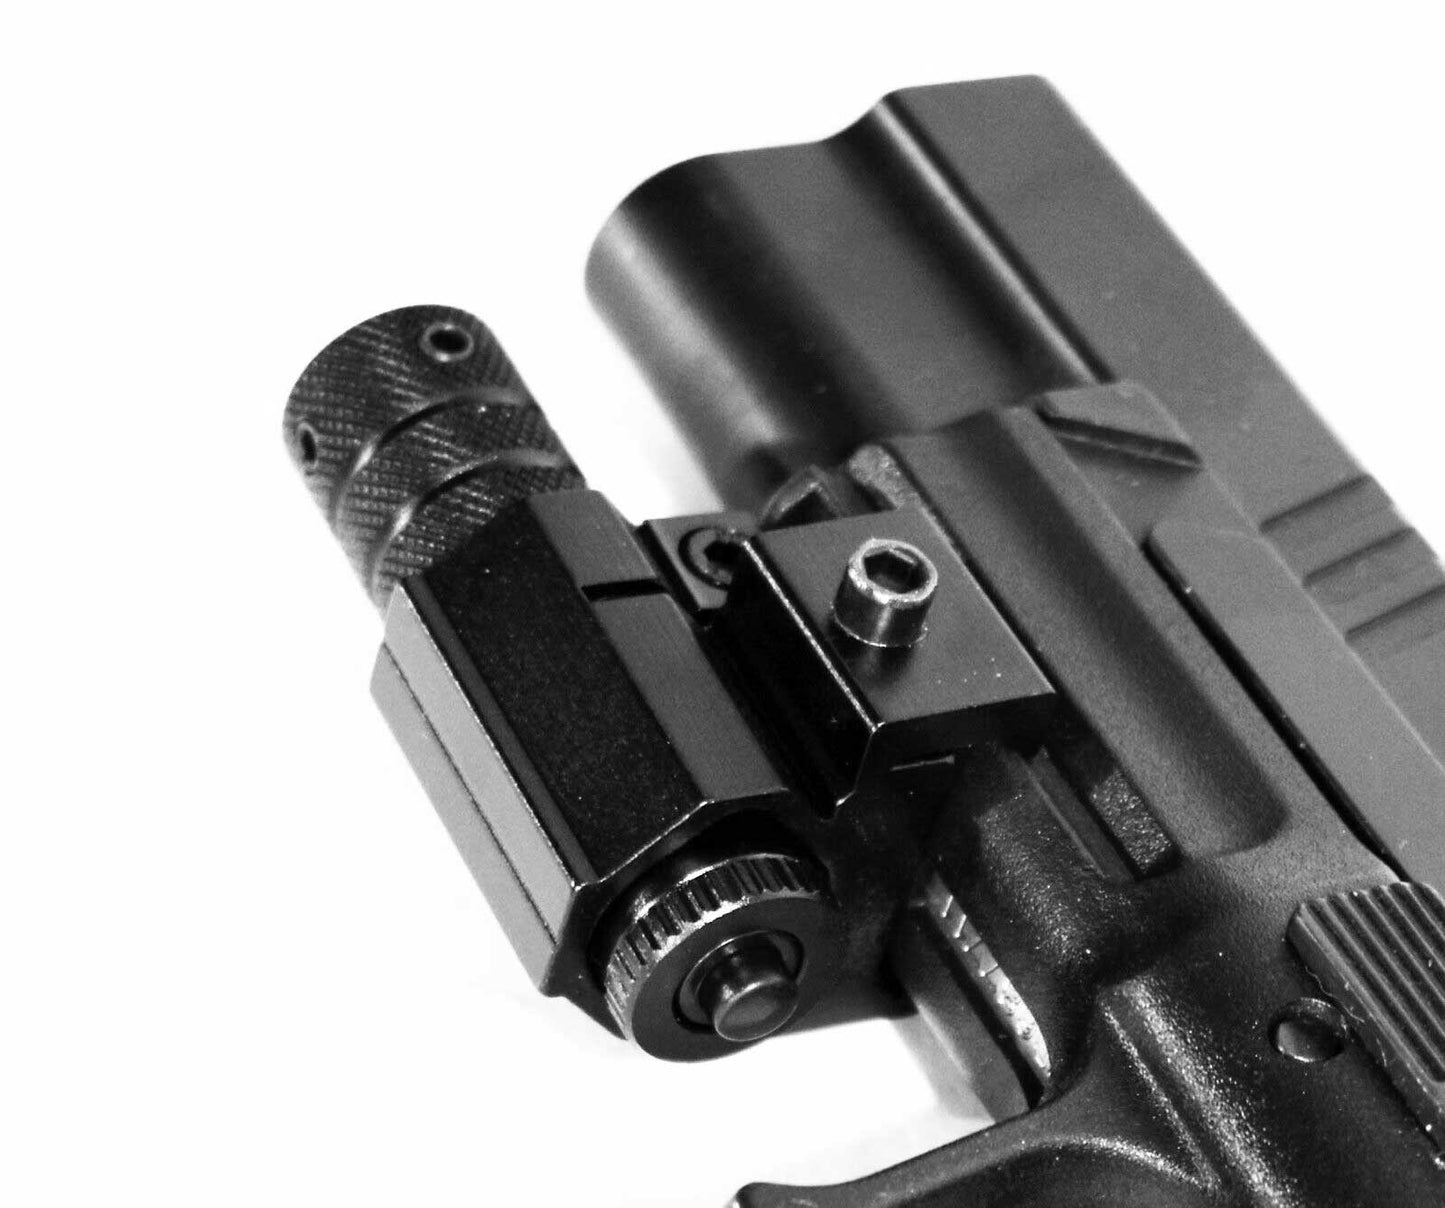 Trinity Red Dot Laser Sight Compatible With Glock 17 Model Handguns.